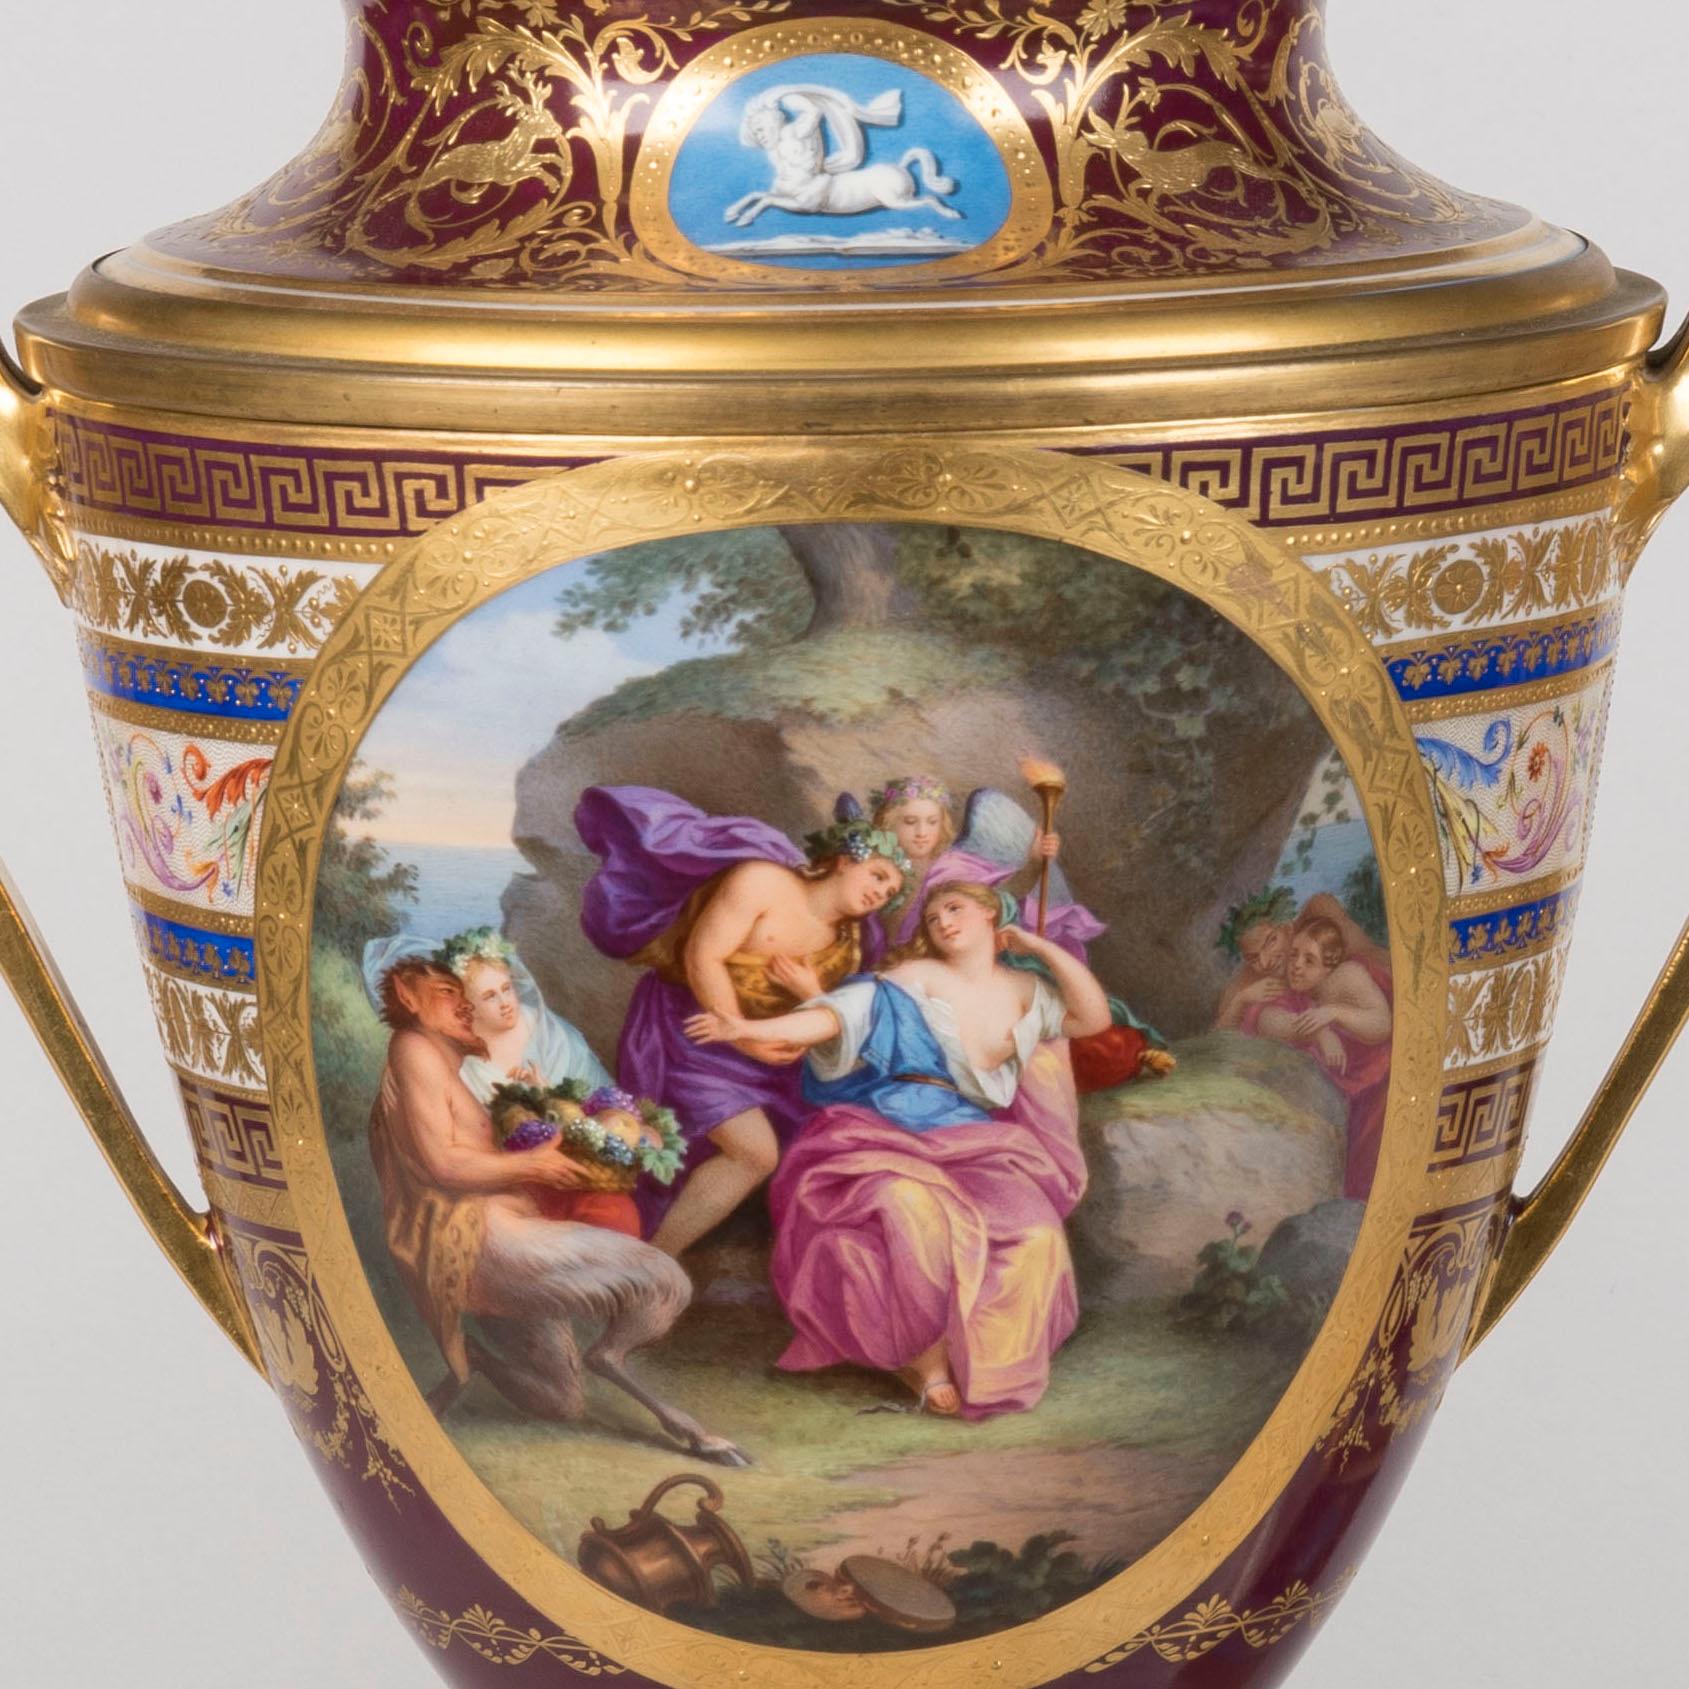 Rare 19th Century Viennese Porcelain Hand-Painted Ice Cream Pail Vases For Sale 4